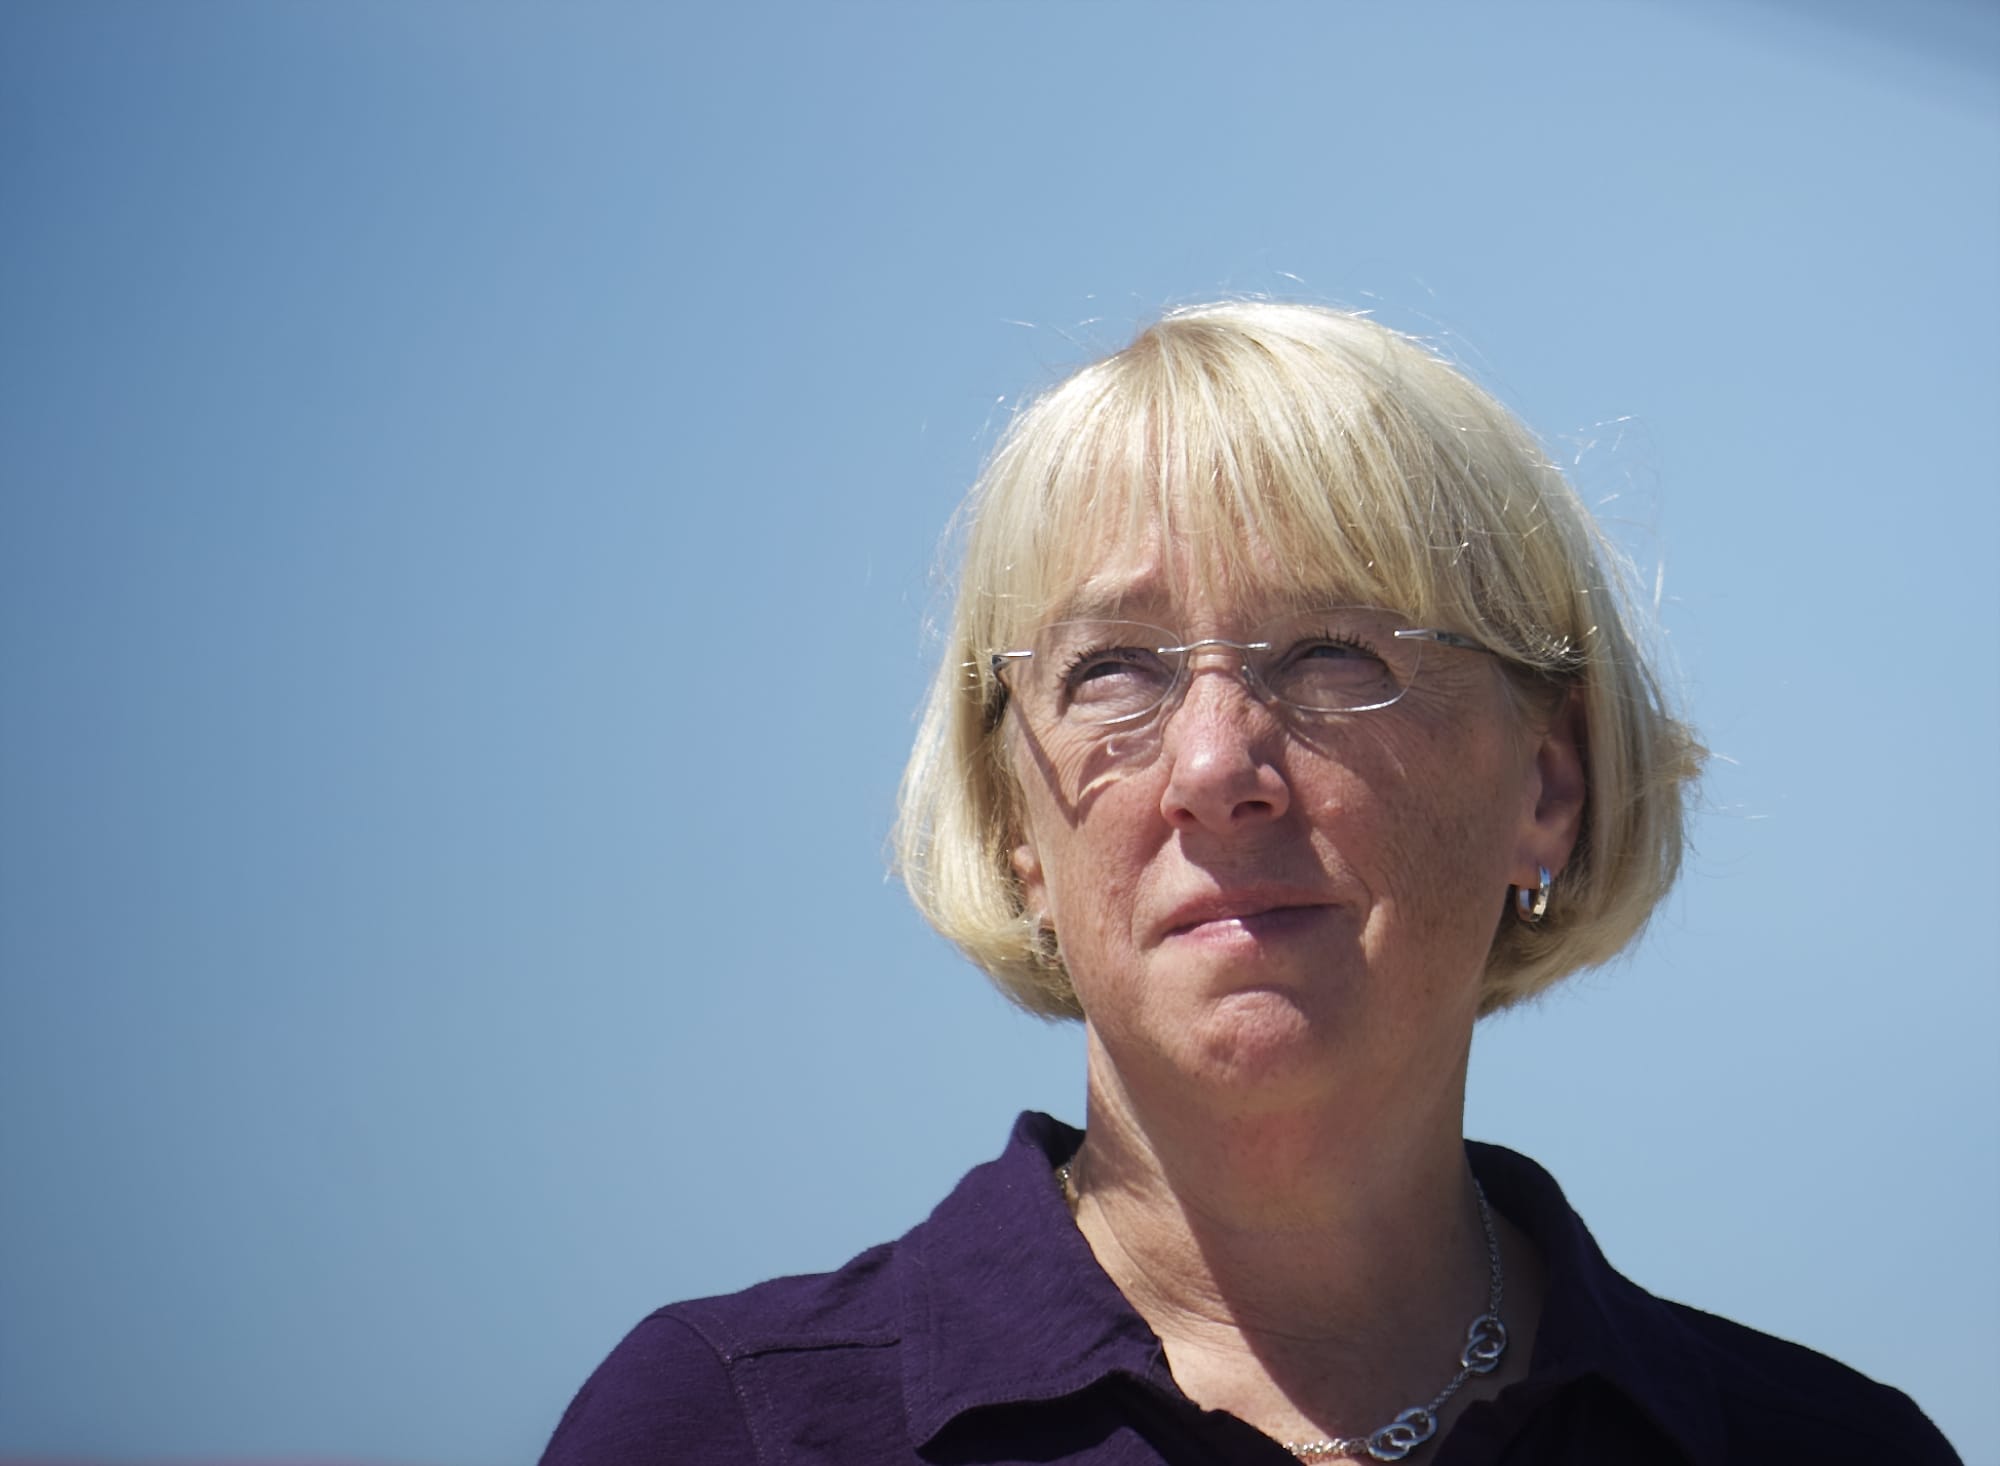 Sen. Patty Murray attends the dedication of the Ridgefield interchange over Interstate 5 on Aug. 12, 2013.